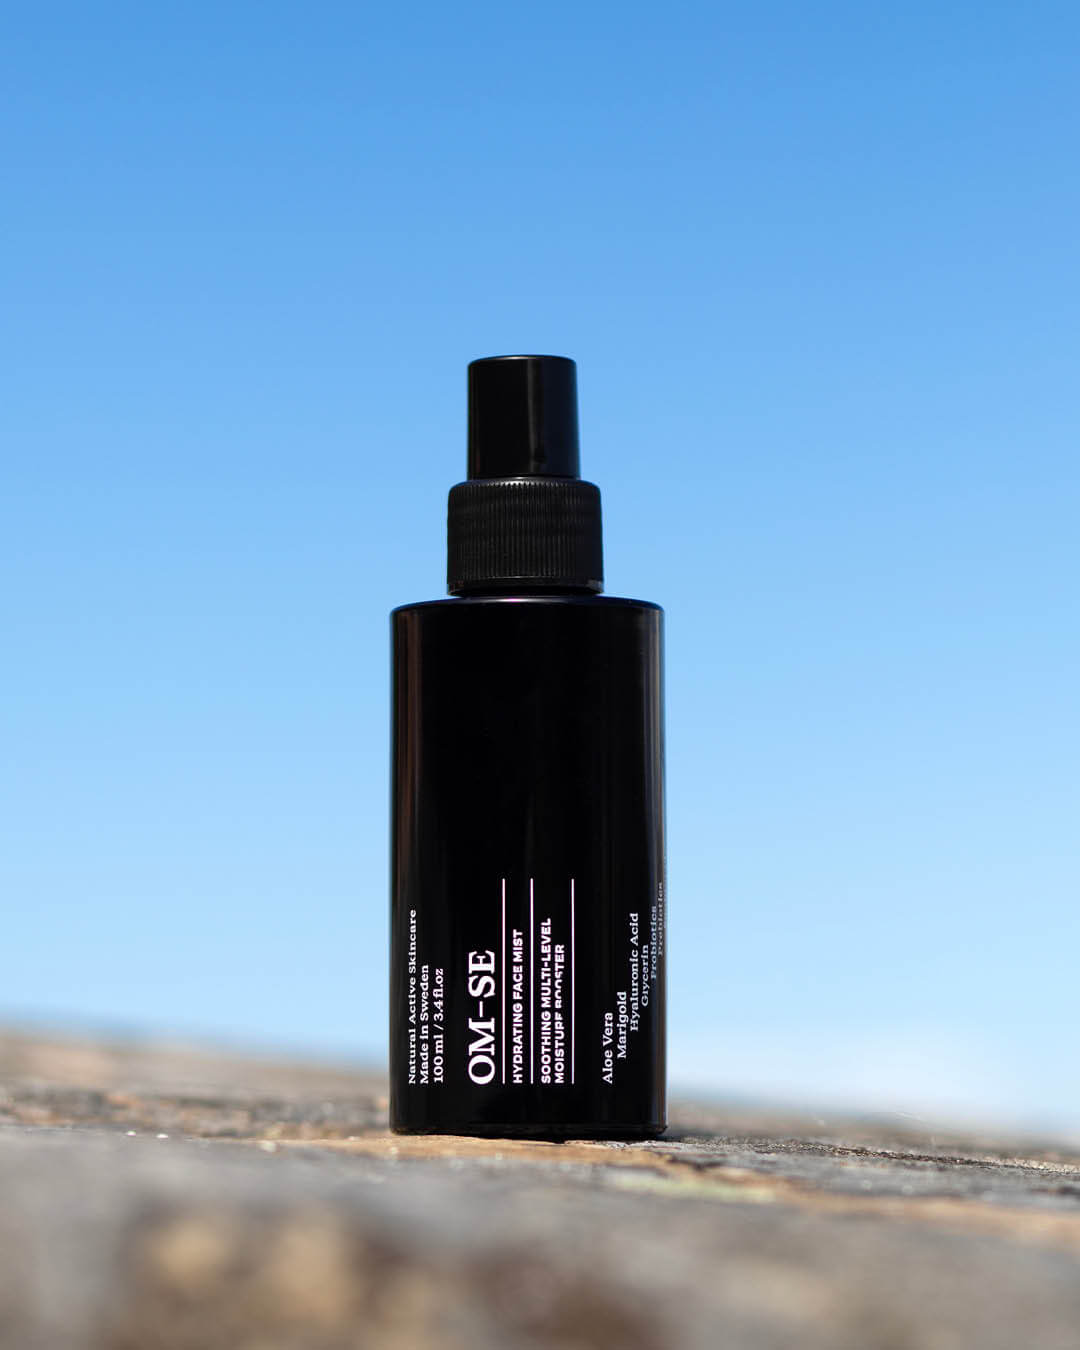 OM-SE Hydrating Face Mist outdoor with blue sky in background